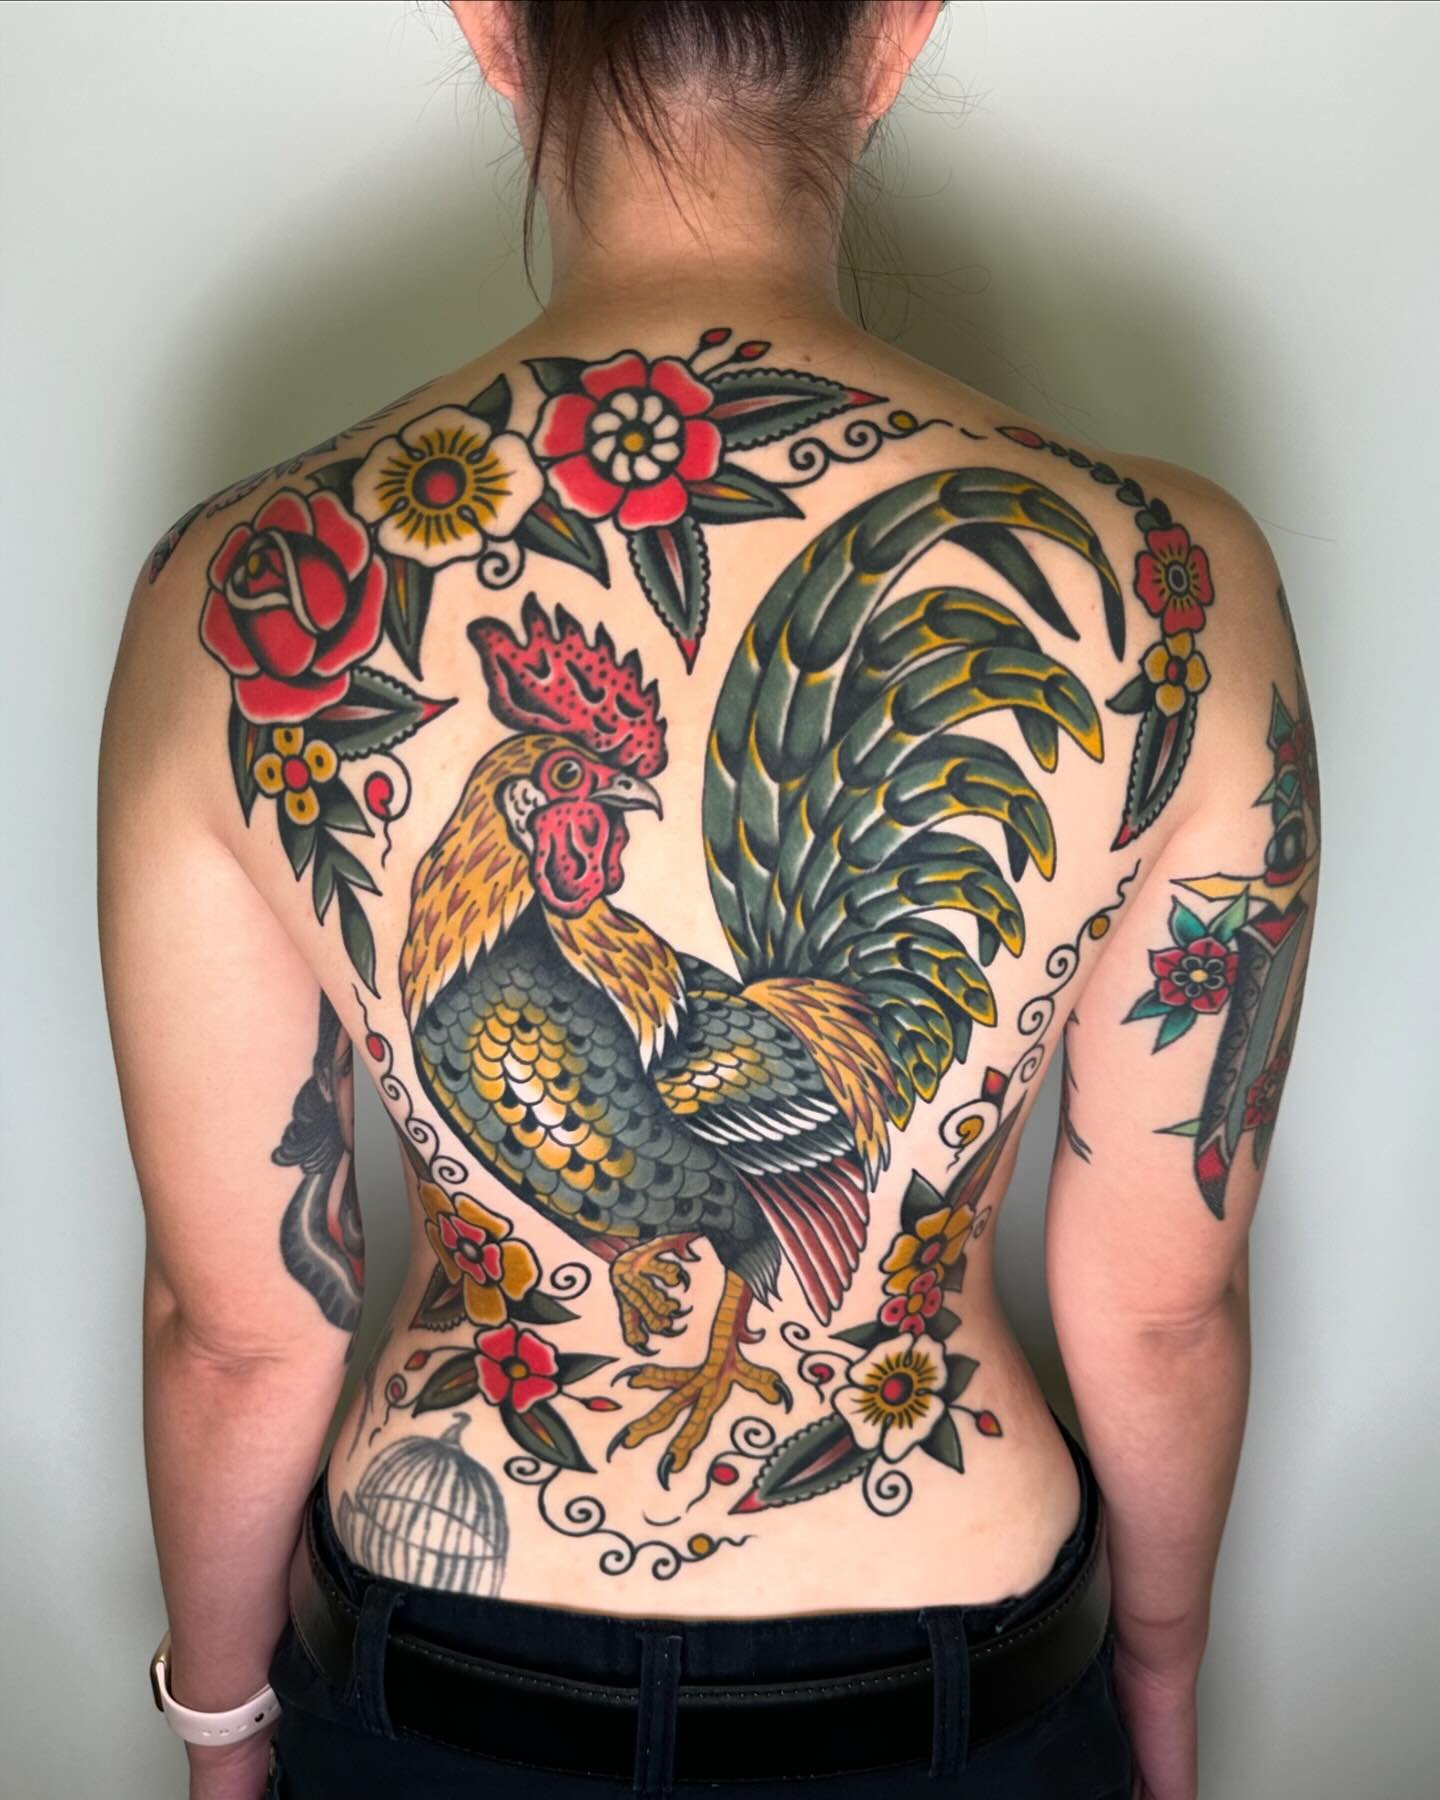 Thank you to Rose for having me do your back! Here it is all healed up. Books open Sunday 5/5. This will be for July-December. Jump on my website and fill out a booking form between 5/5-12 and I&rsquo;ll be getting back to everyone throughout May. I&